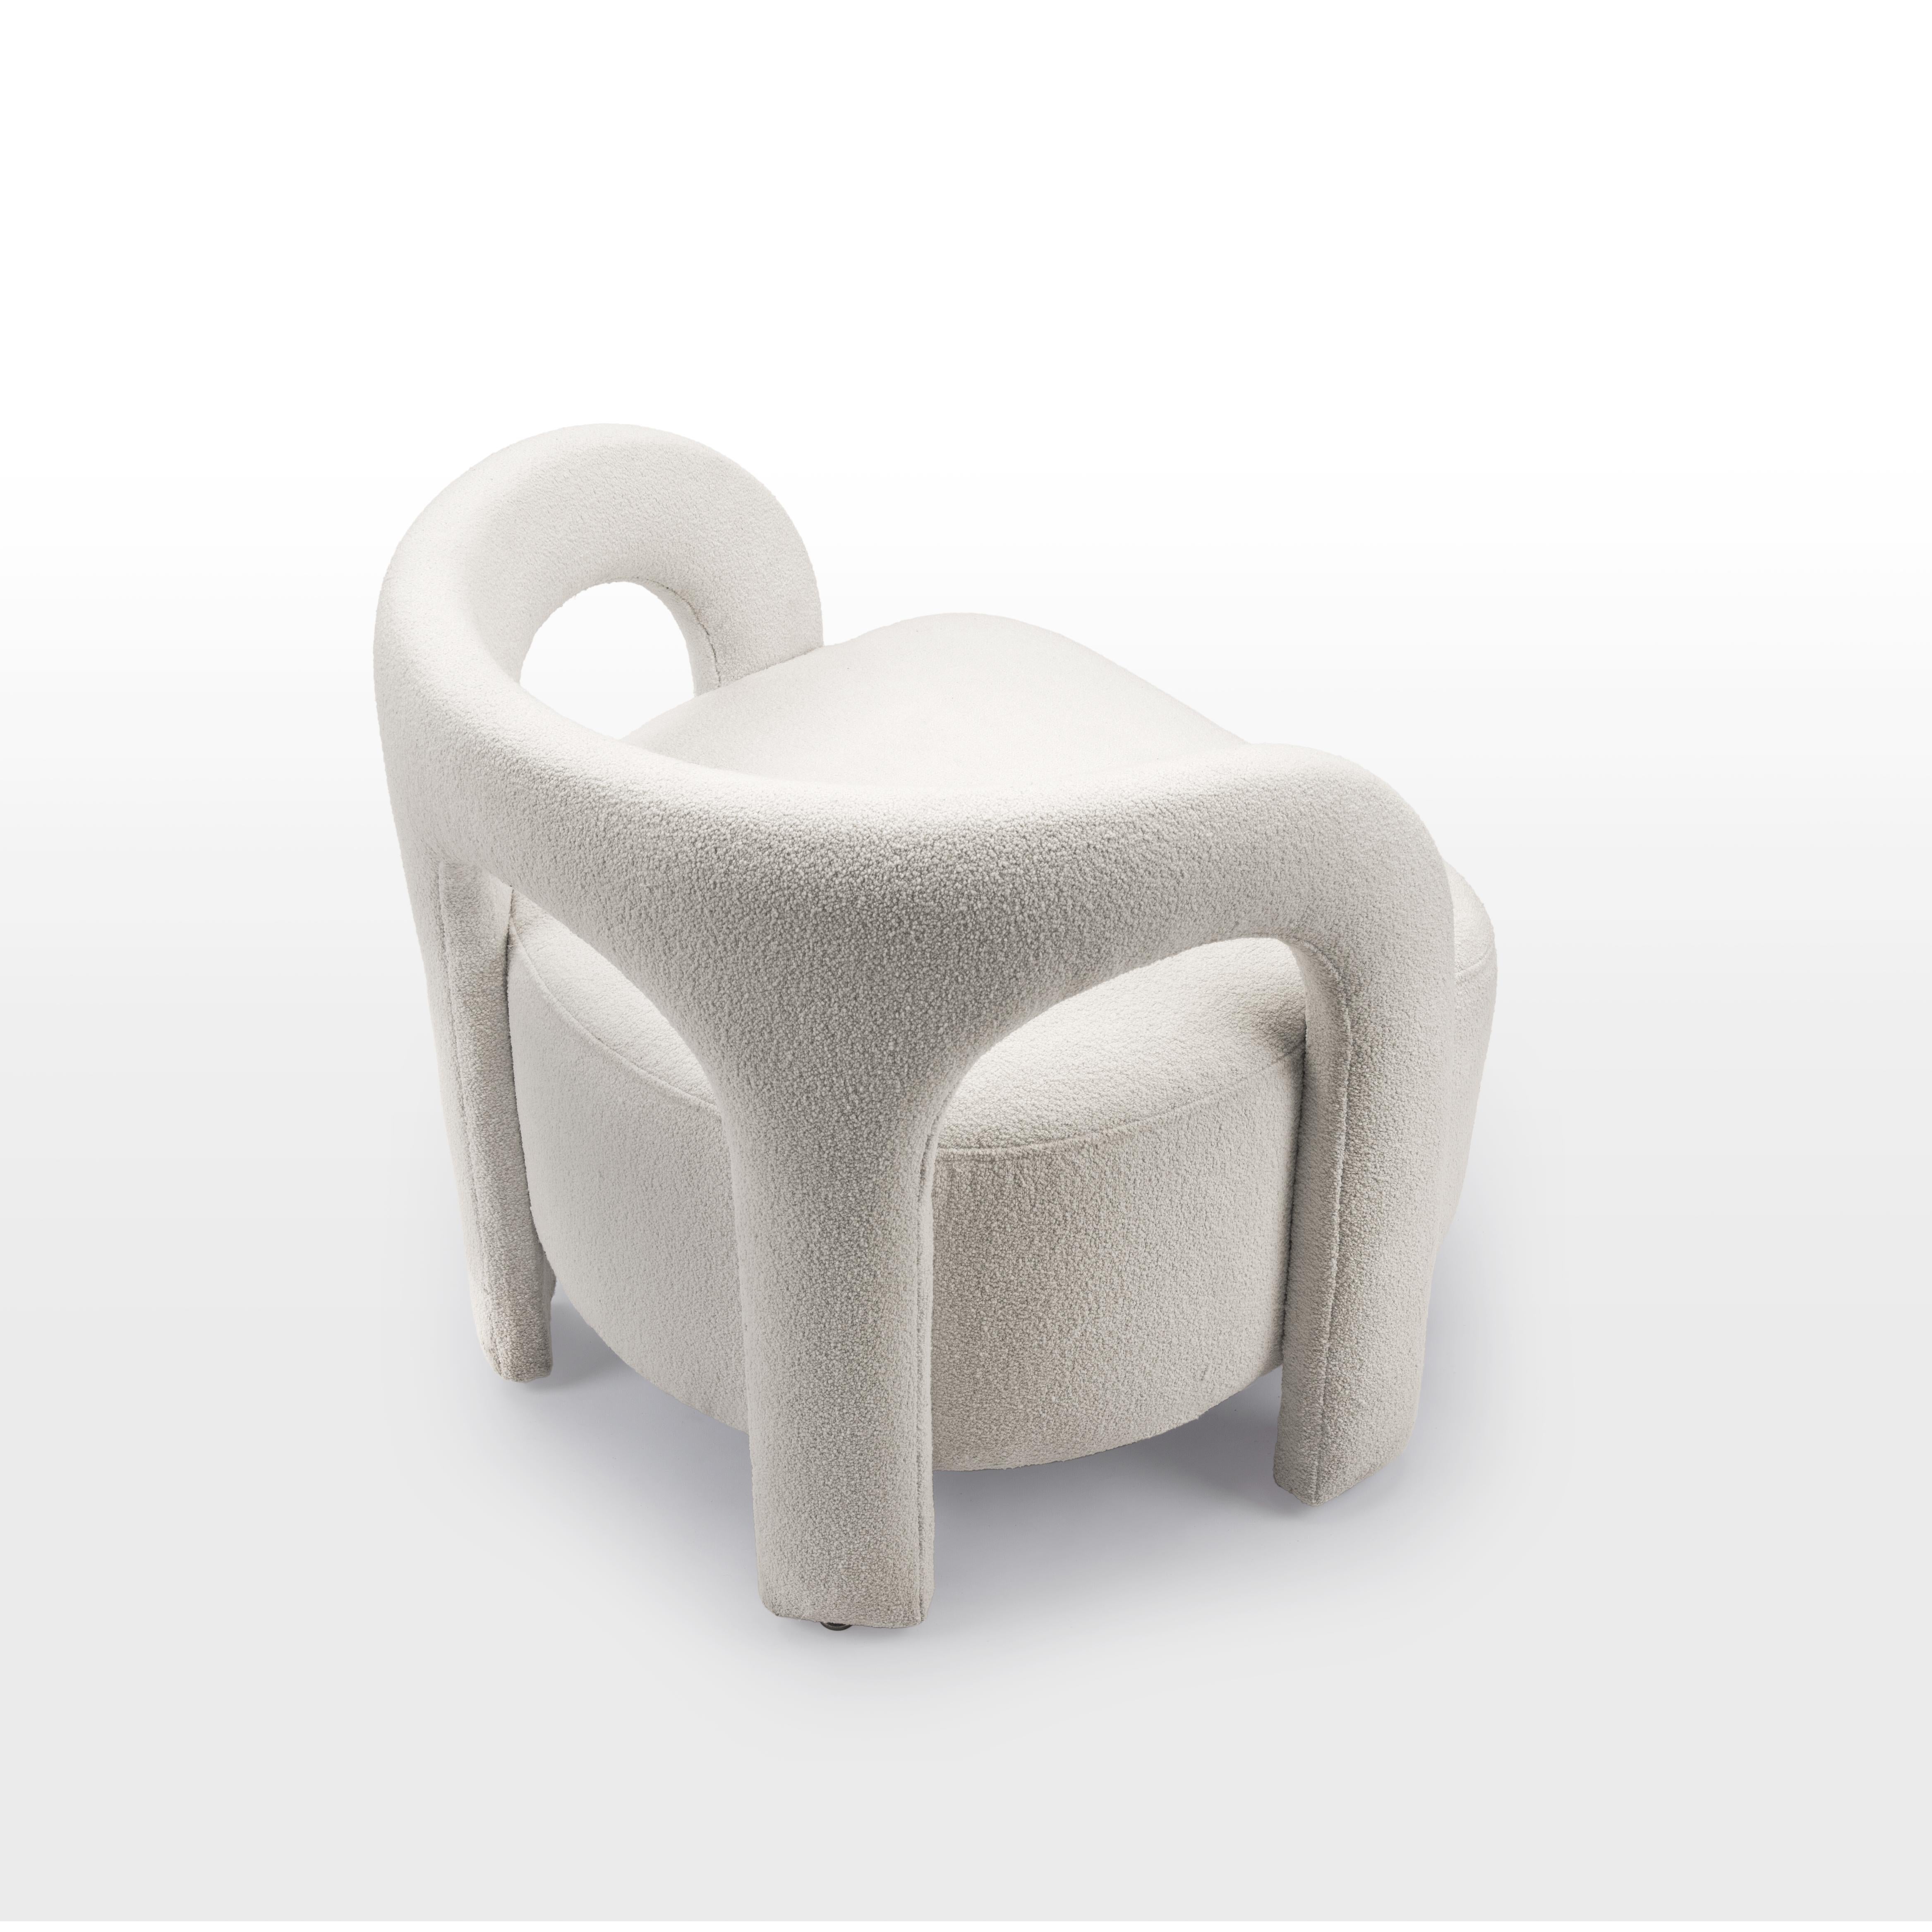 White curvy upholstered armchair inspired By Egypt's Nubian Architecture

The Nubia set is the heart of this Nubian collection. Nubian houses are typically built for entire families and are known for having an outdoor central courtyard where the